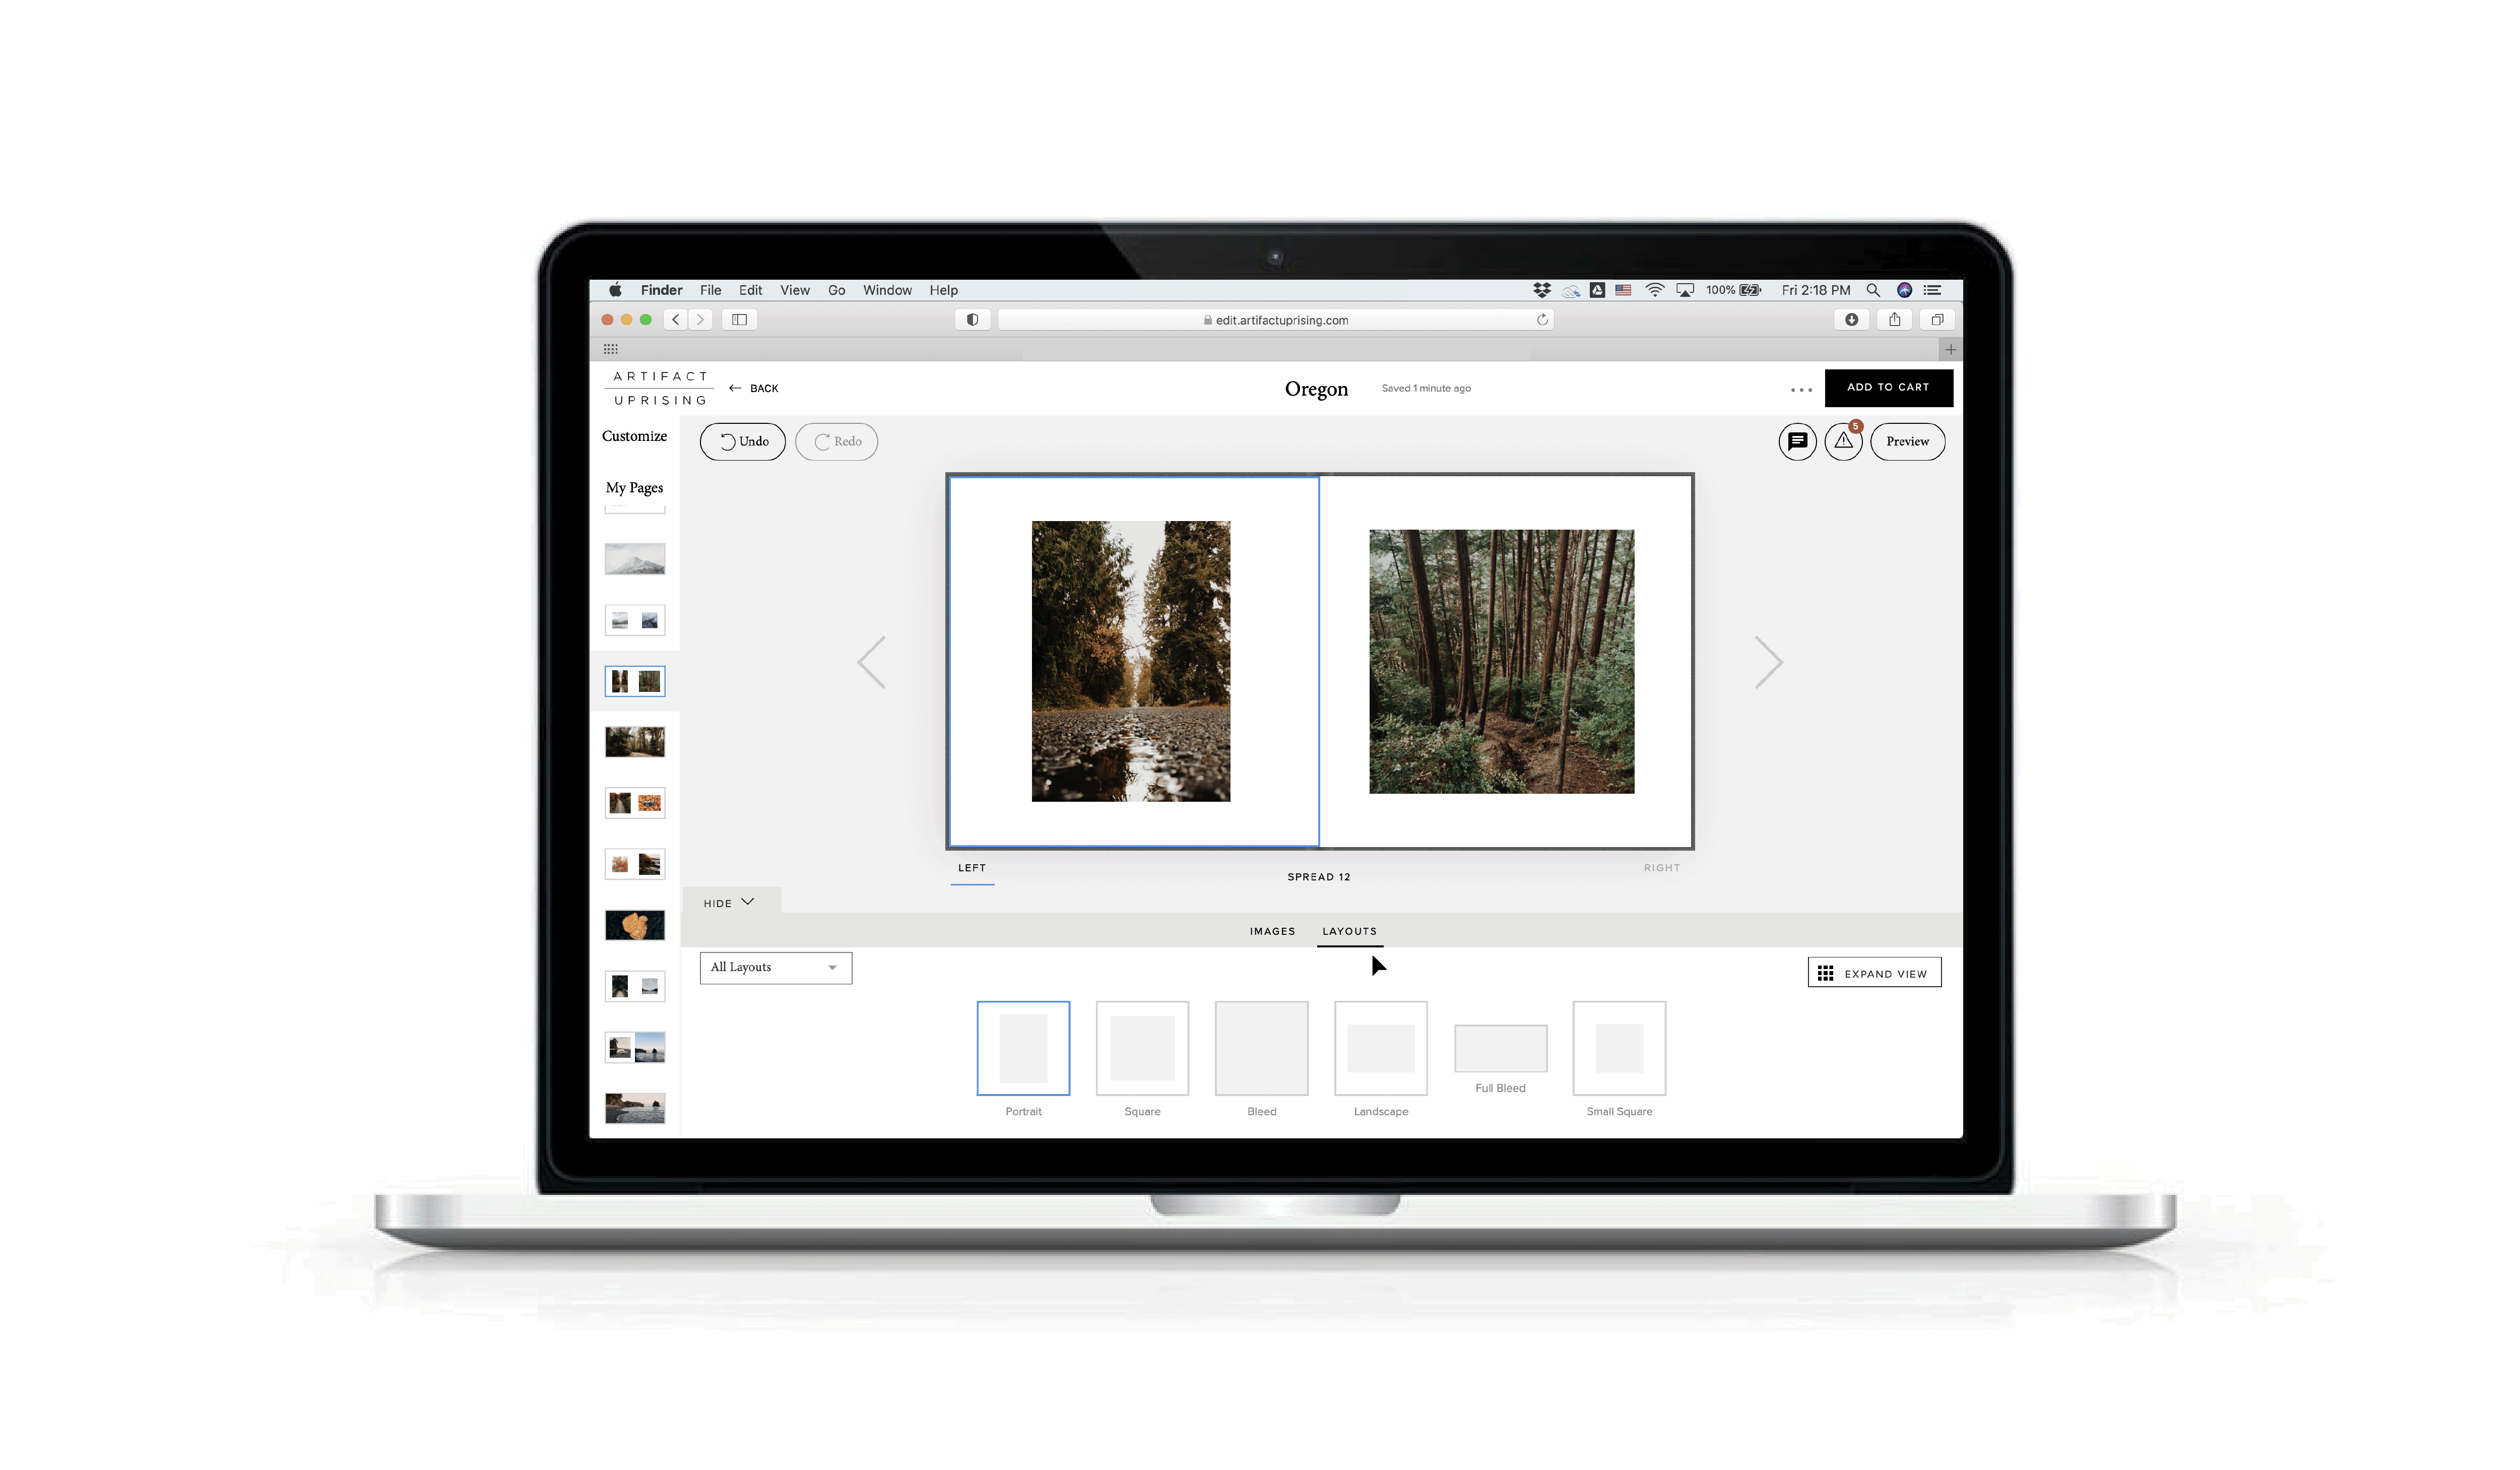 Searching for layouts by number of images